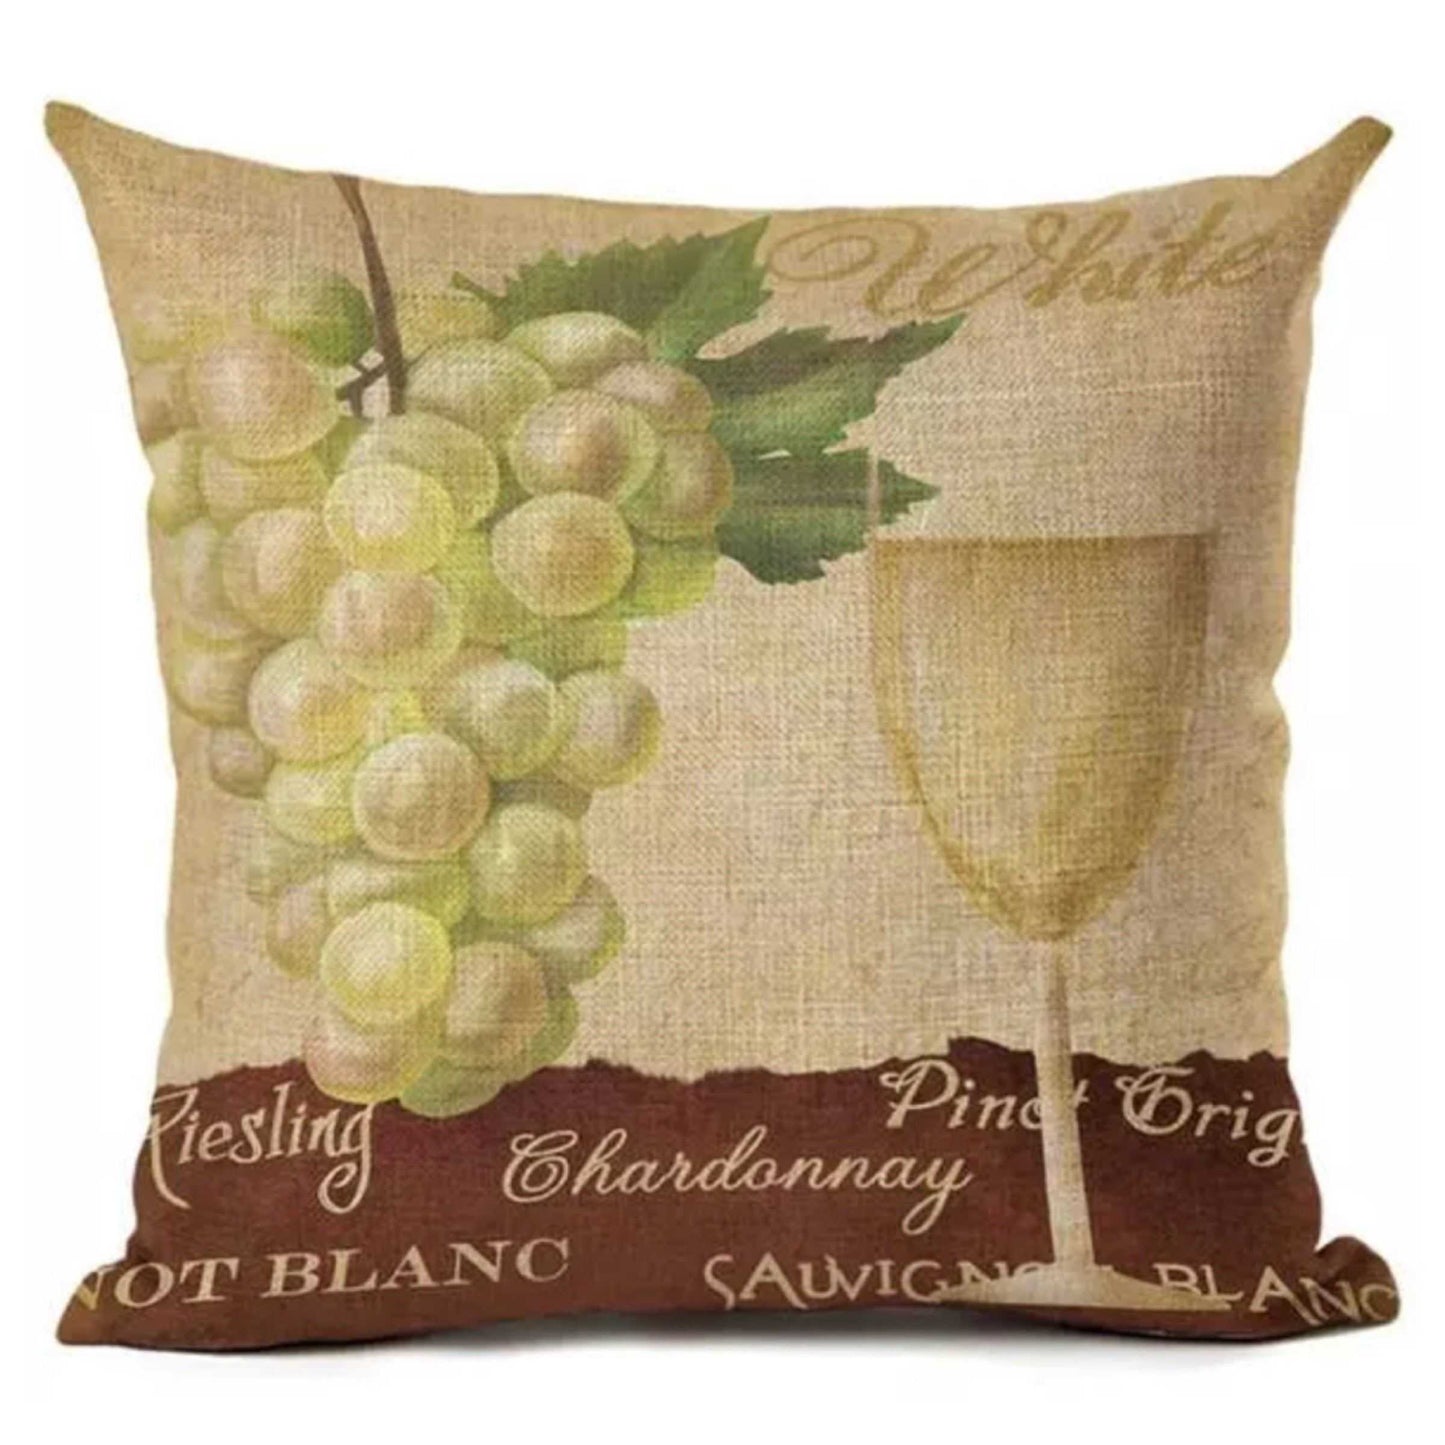 Cushion Pillow Vintage White Riesling Wine